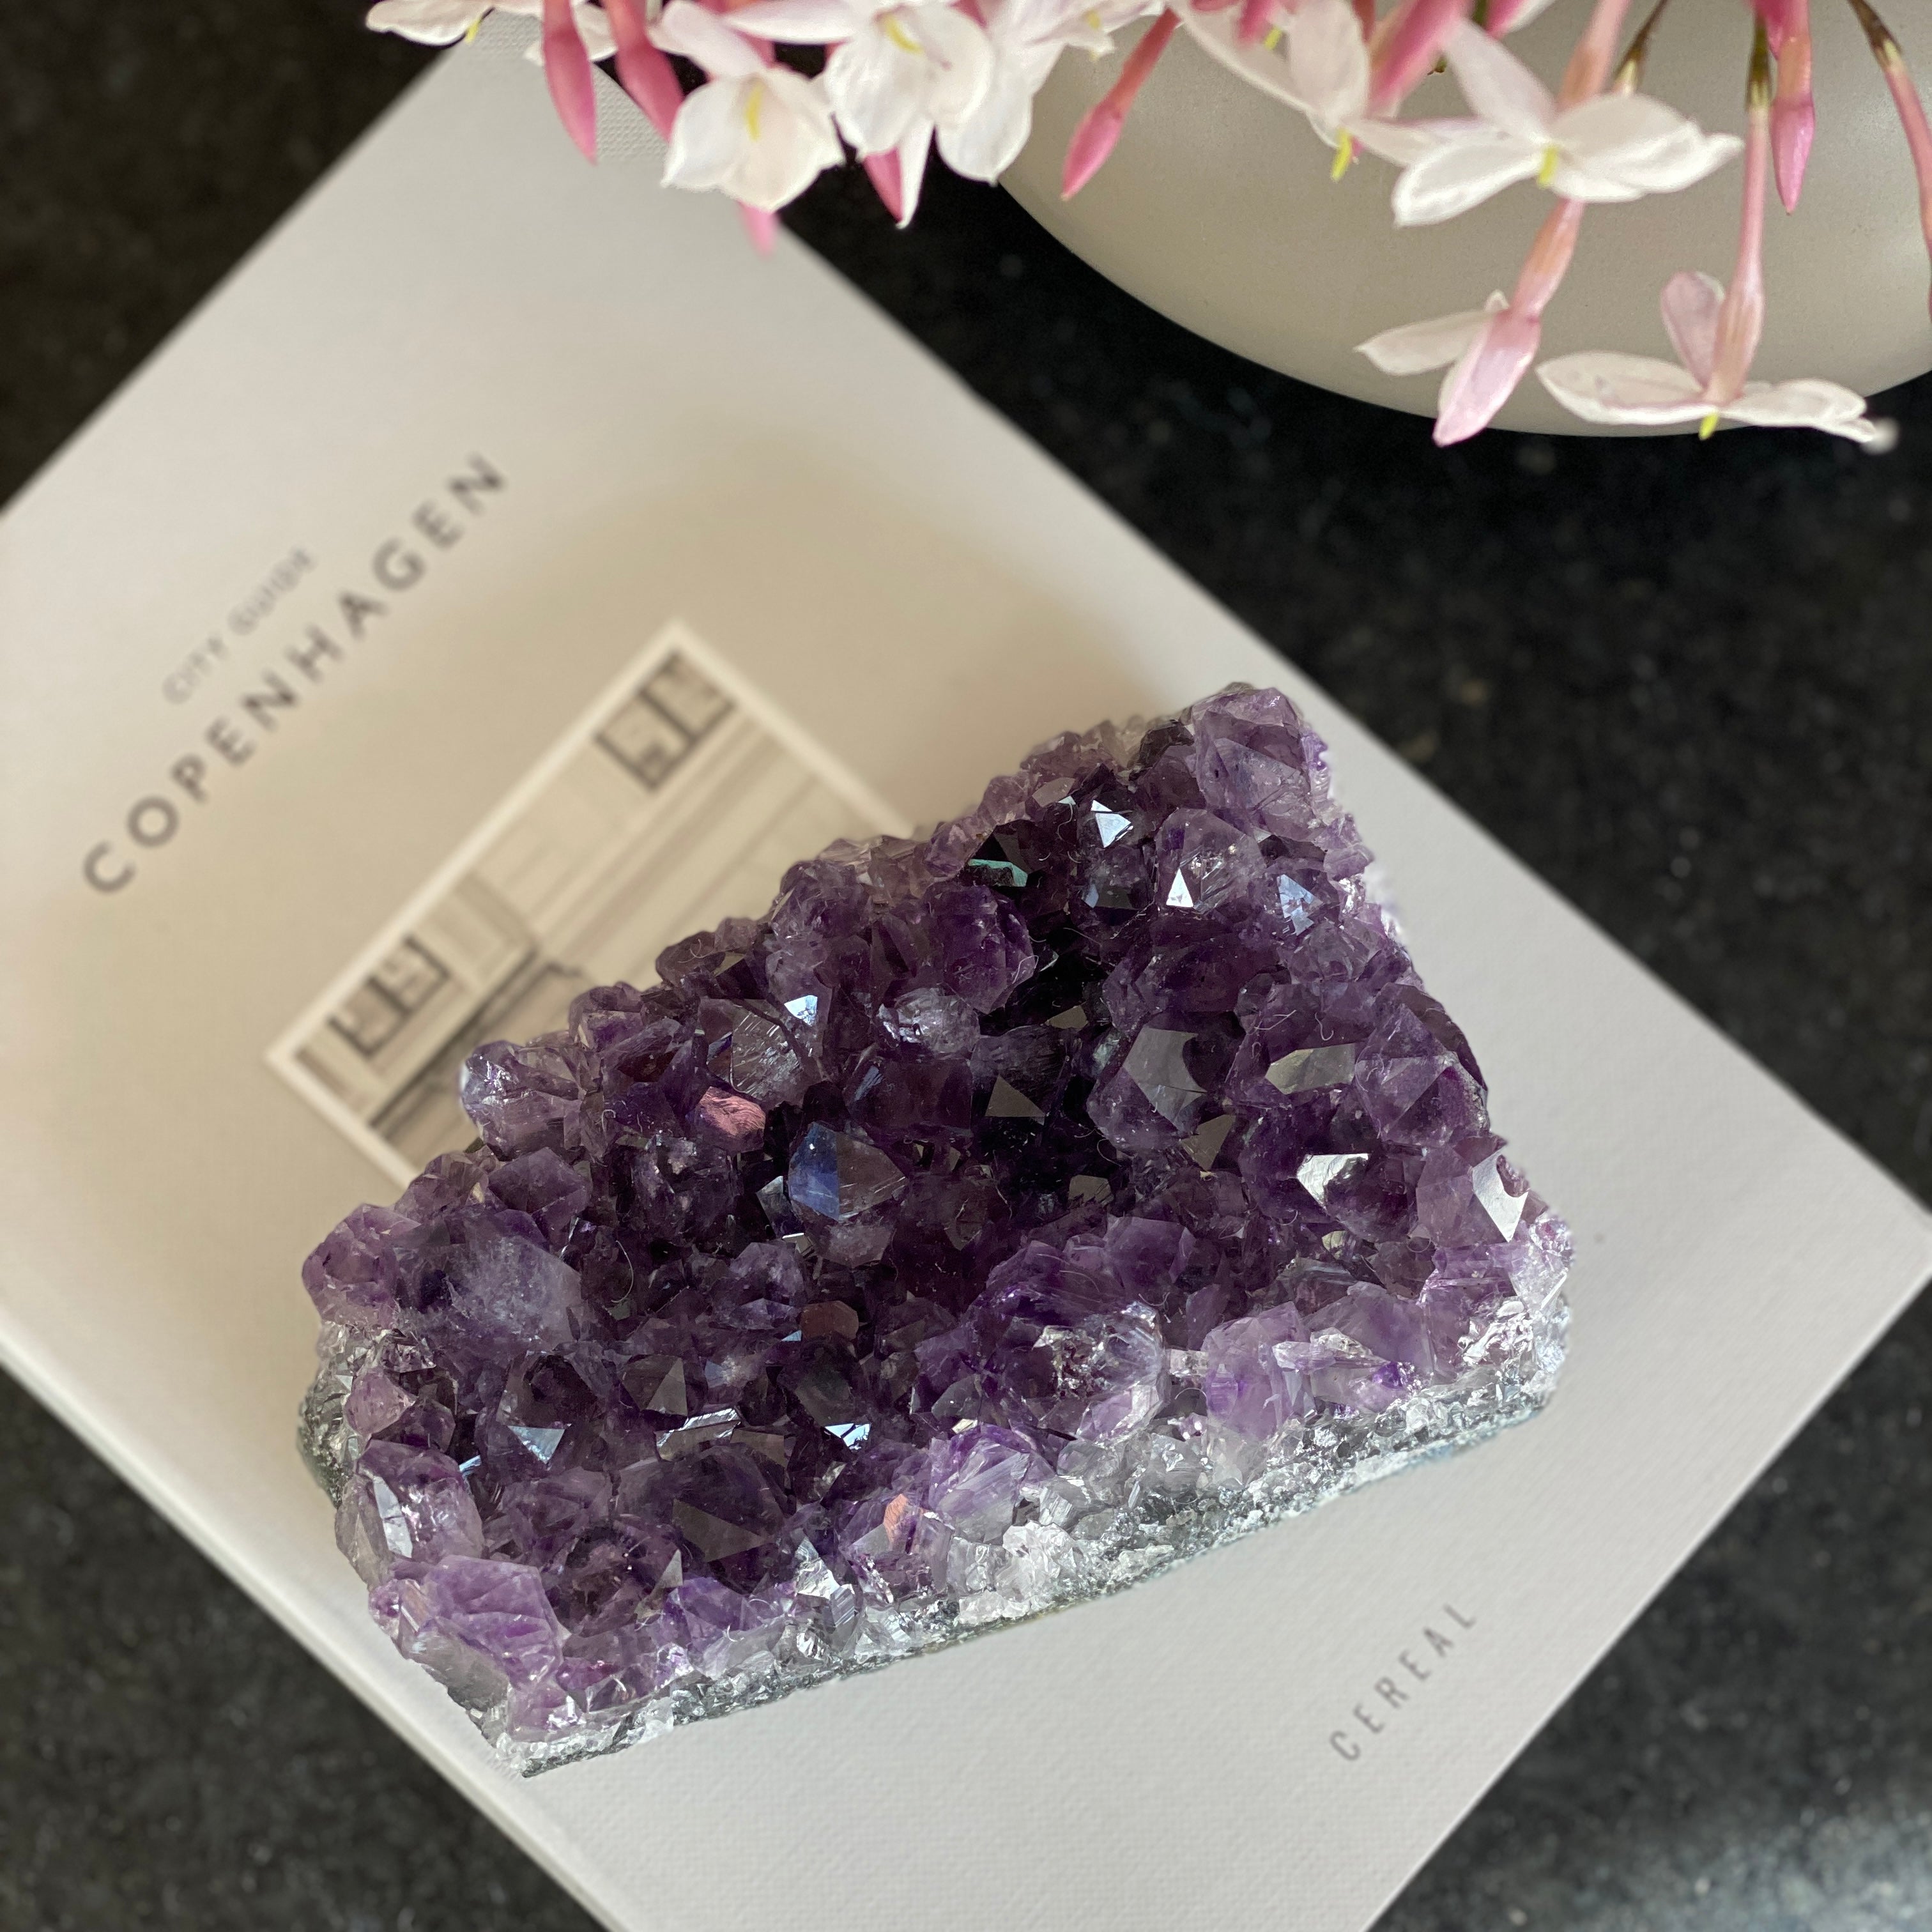 Amethyst and agate cluster for home decor, coffee table decoration